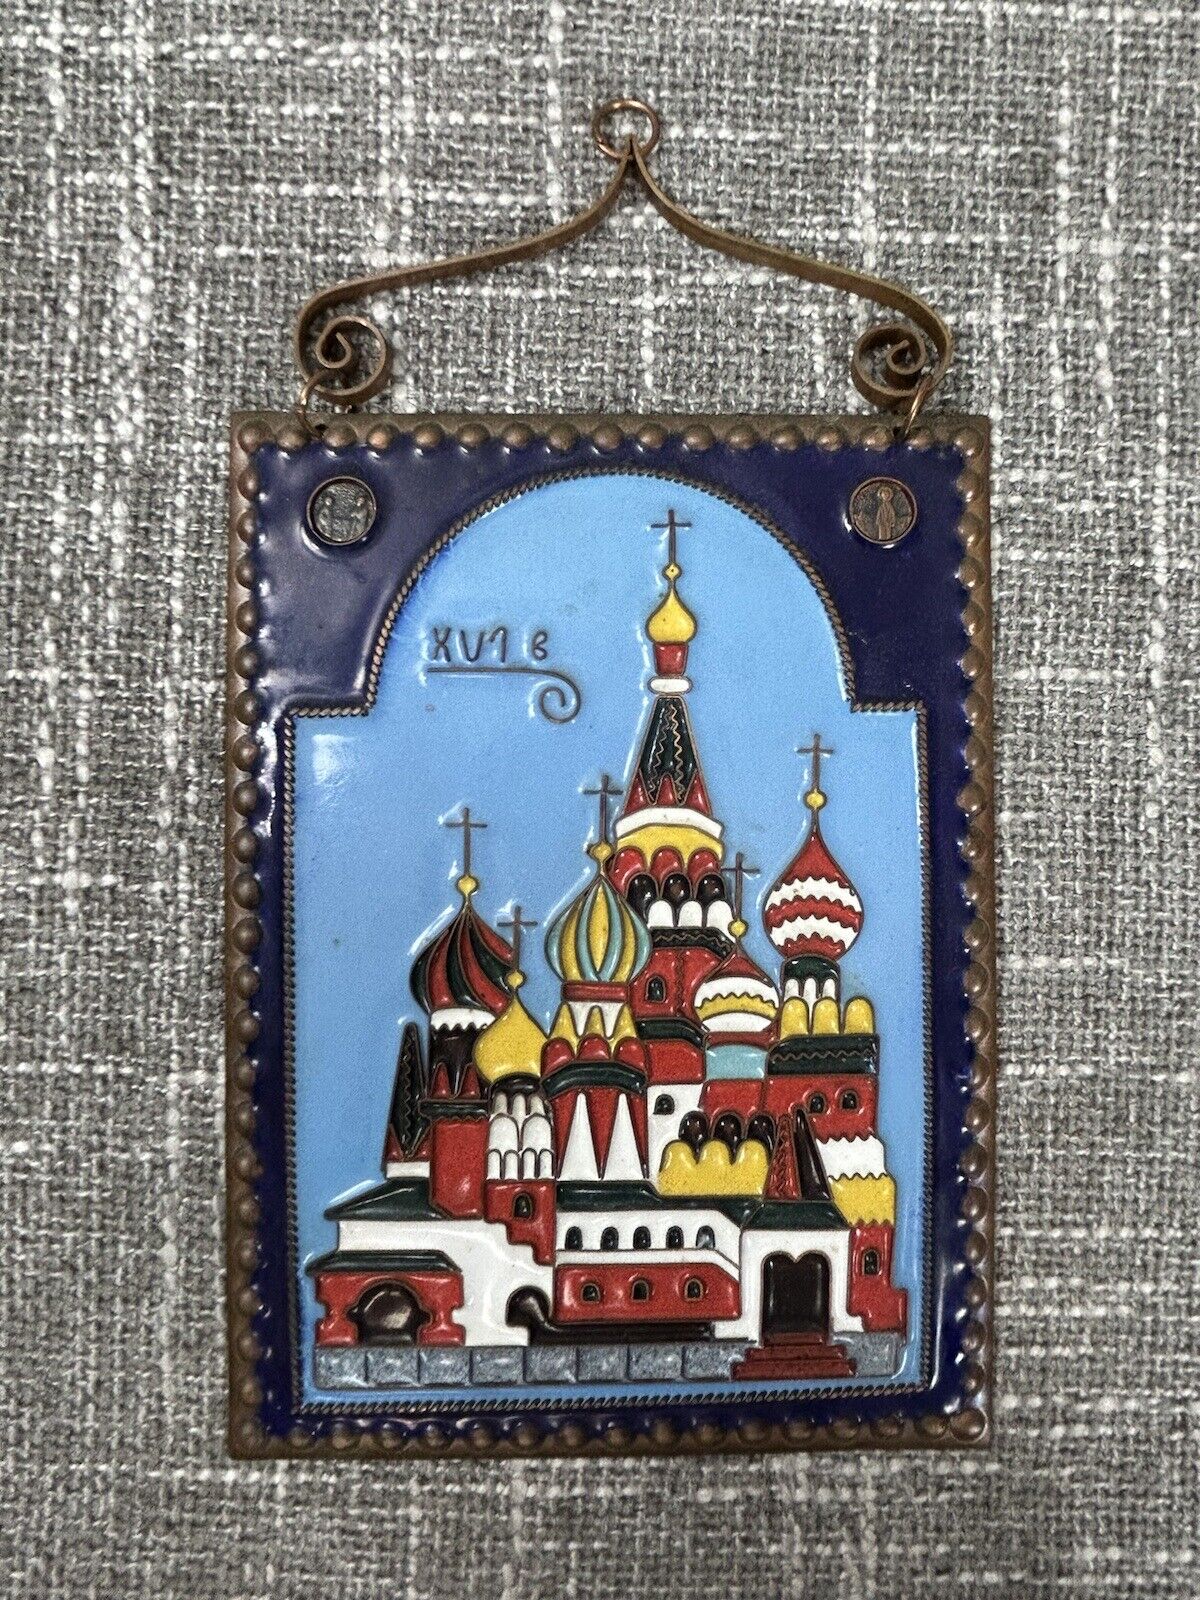 Vintage Enameled Copper Wall Hanging St Basil Cathedral Russian Onion Dome 1991